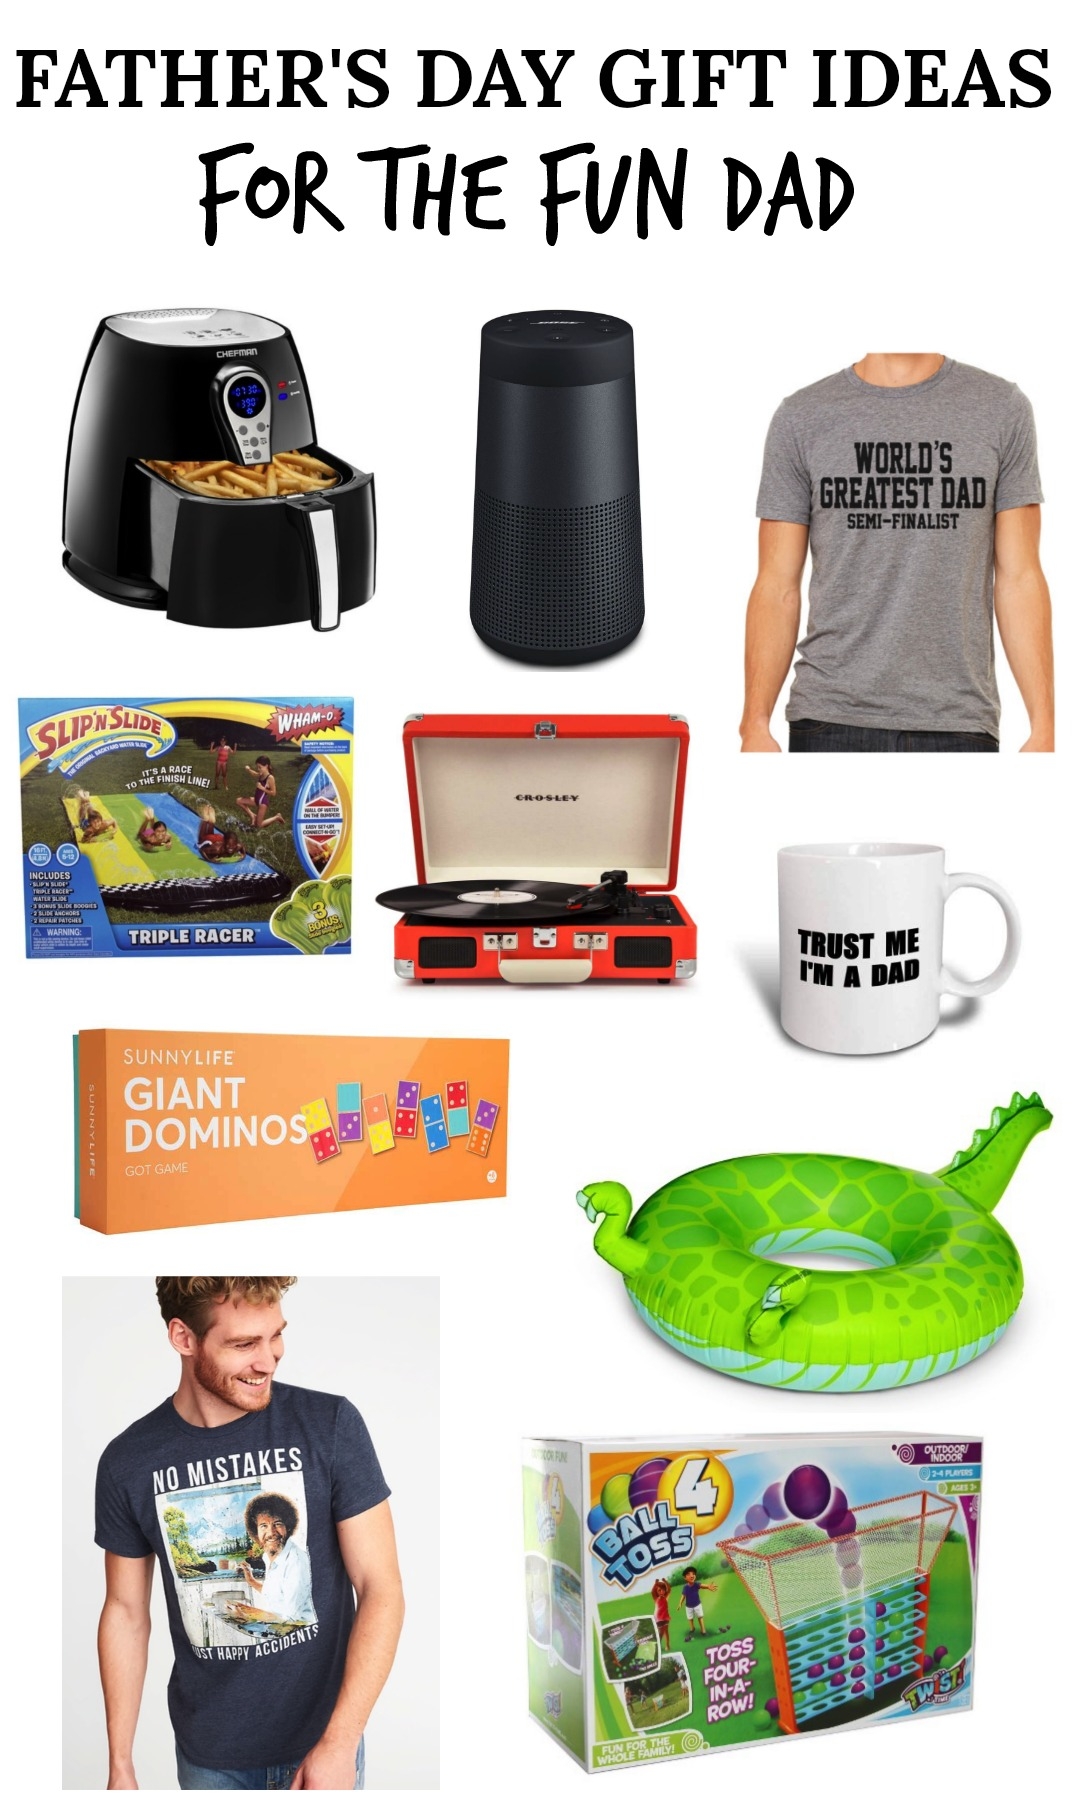 Father's Day Gift Ideas for the Fun Dad | Fun Father's Day Presents